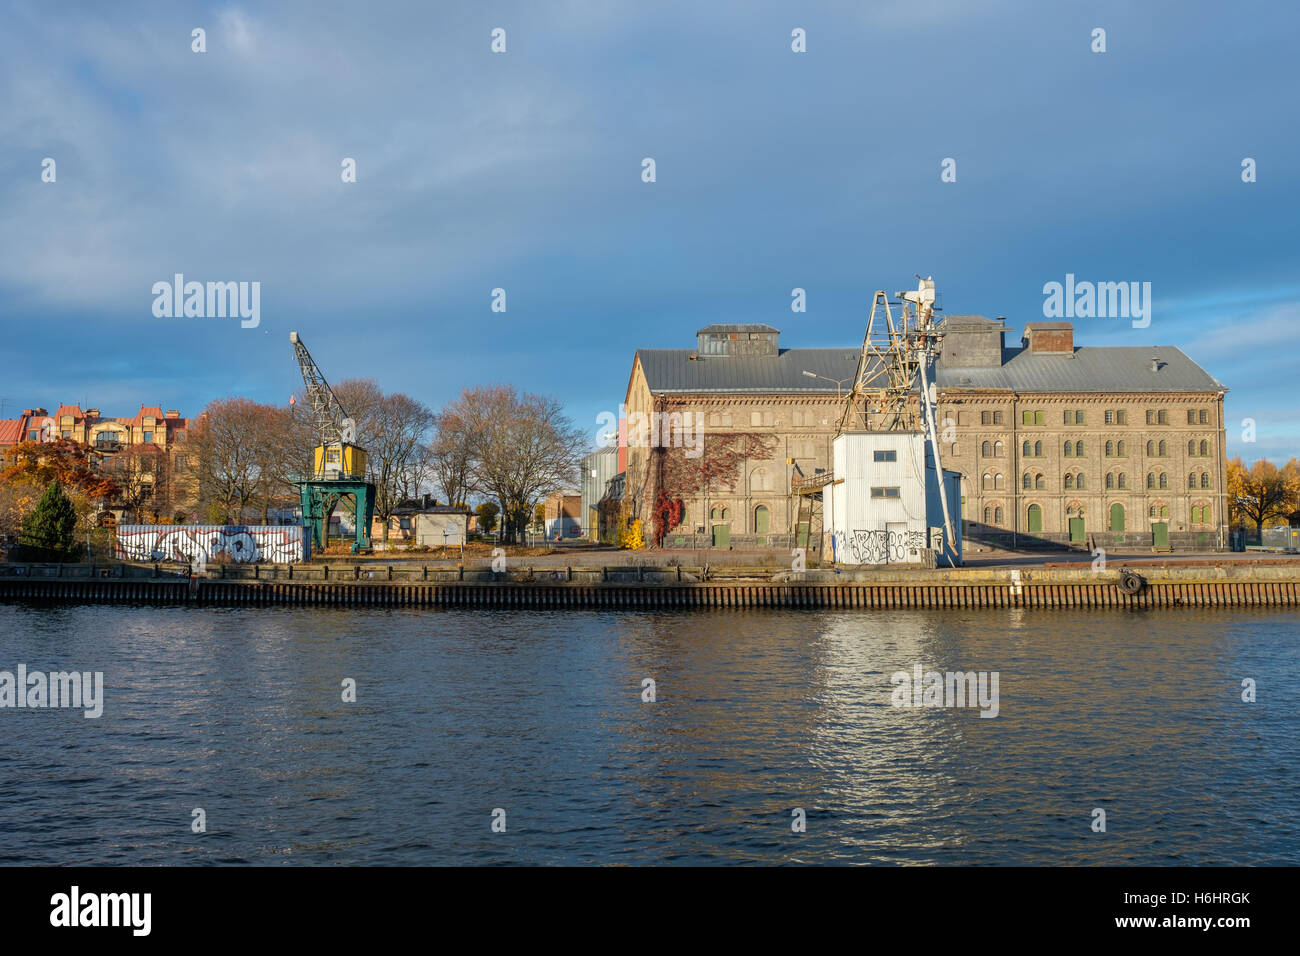 Autumn in Norrkoping, Sweden. Stock Photo